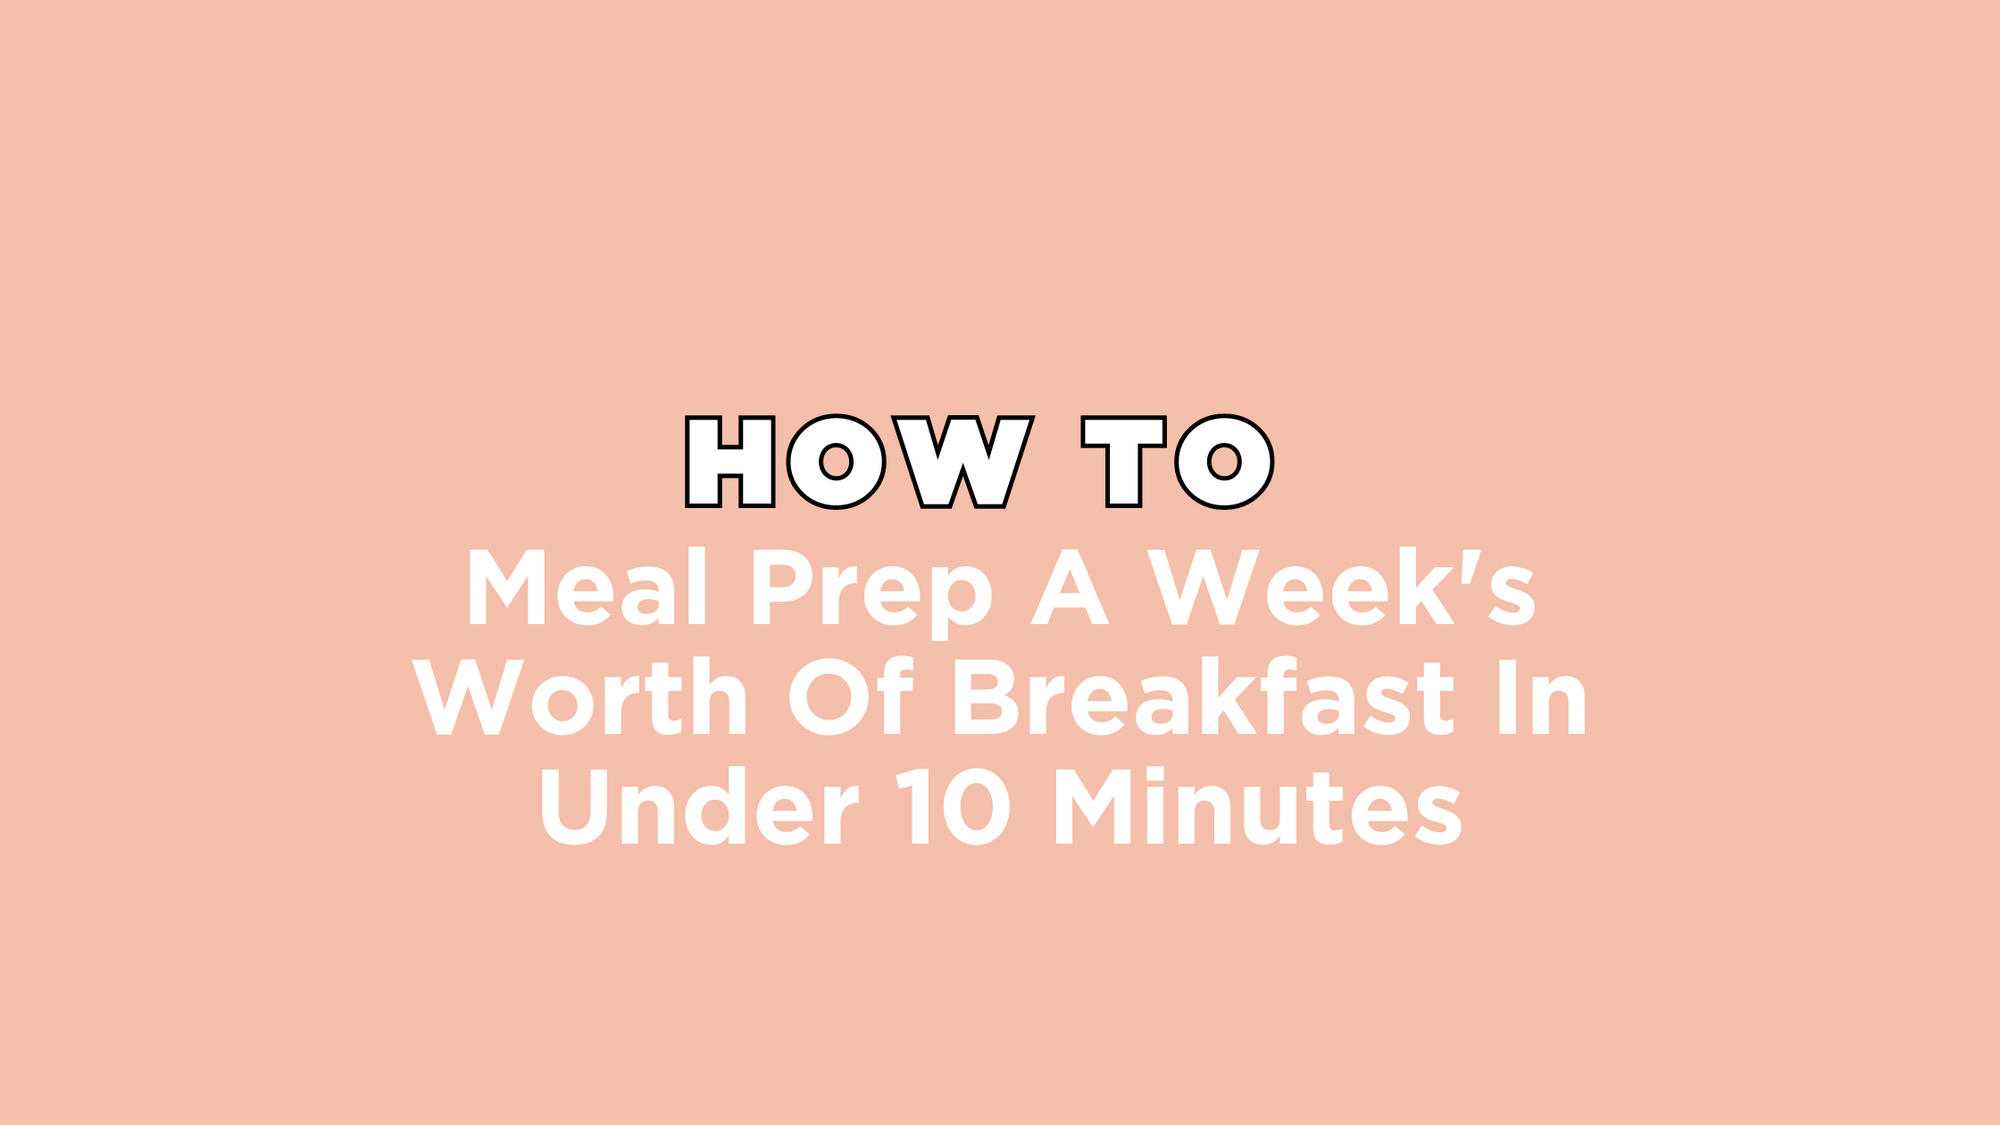 How To Meal Prep A Week's Worth Of Breakfast In Under 10 Minutes